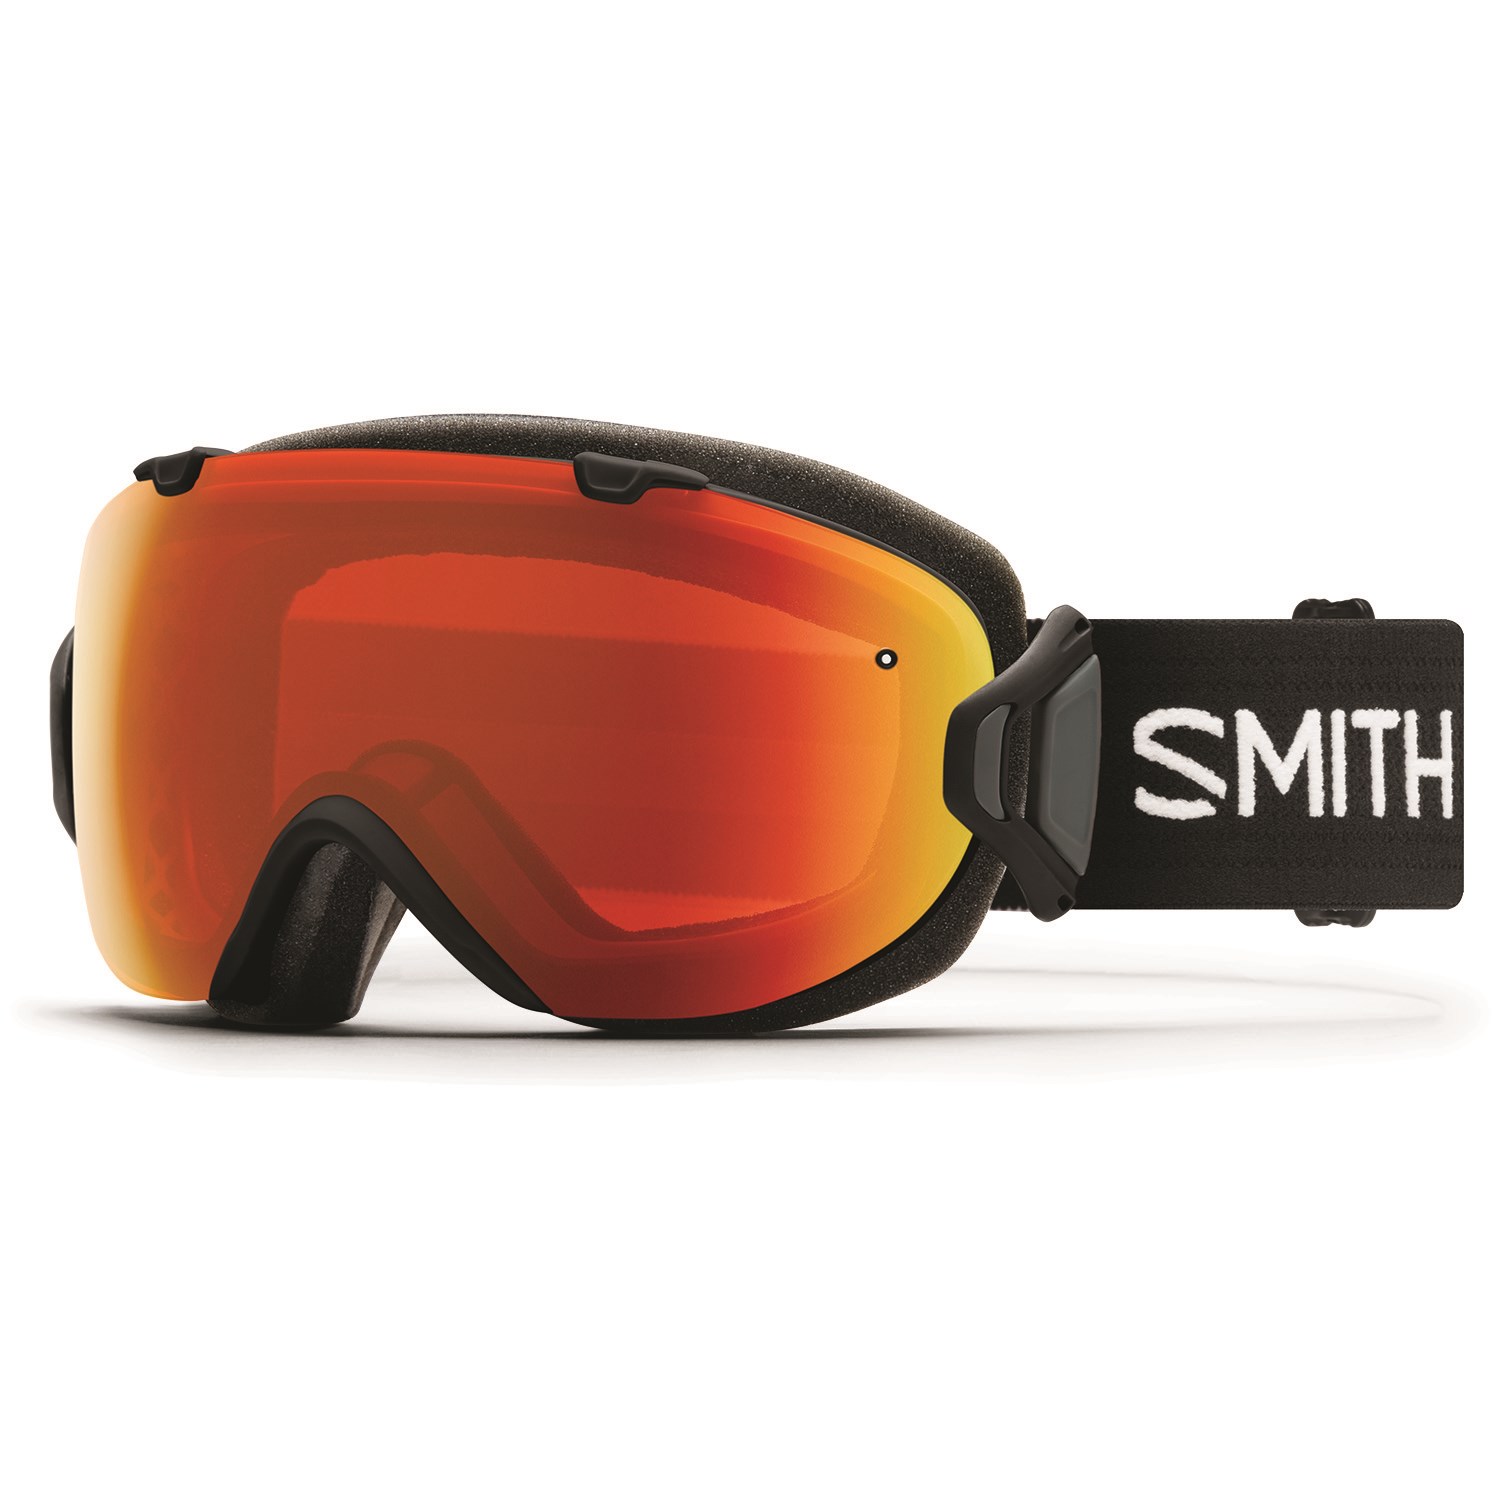 How To Buy Ski Snowboard Goggles Lens Size Fit Guide Evo inside How To Choose Snowboard Goggles